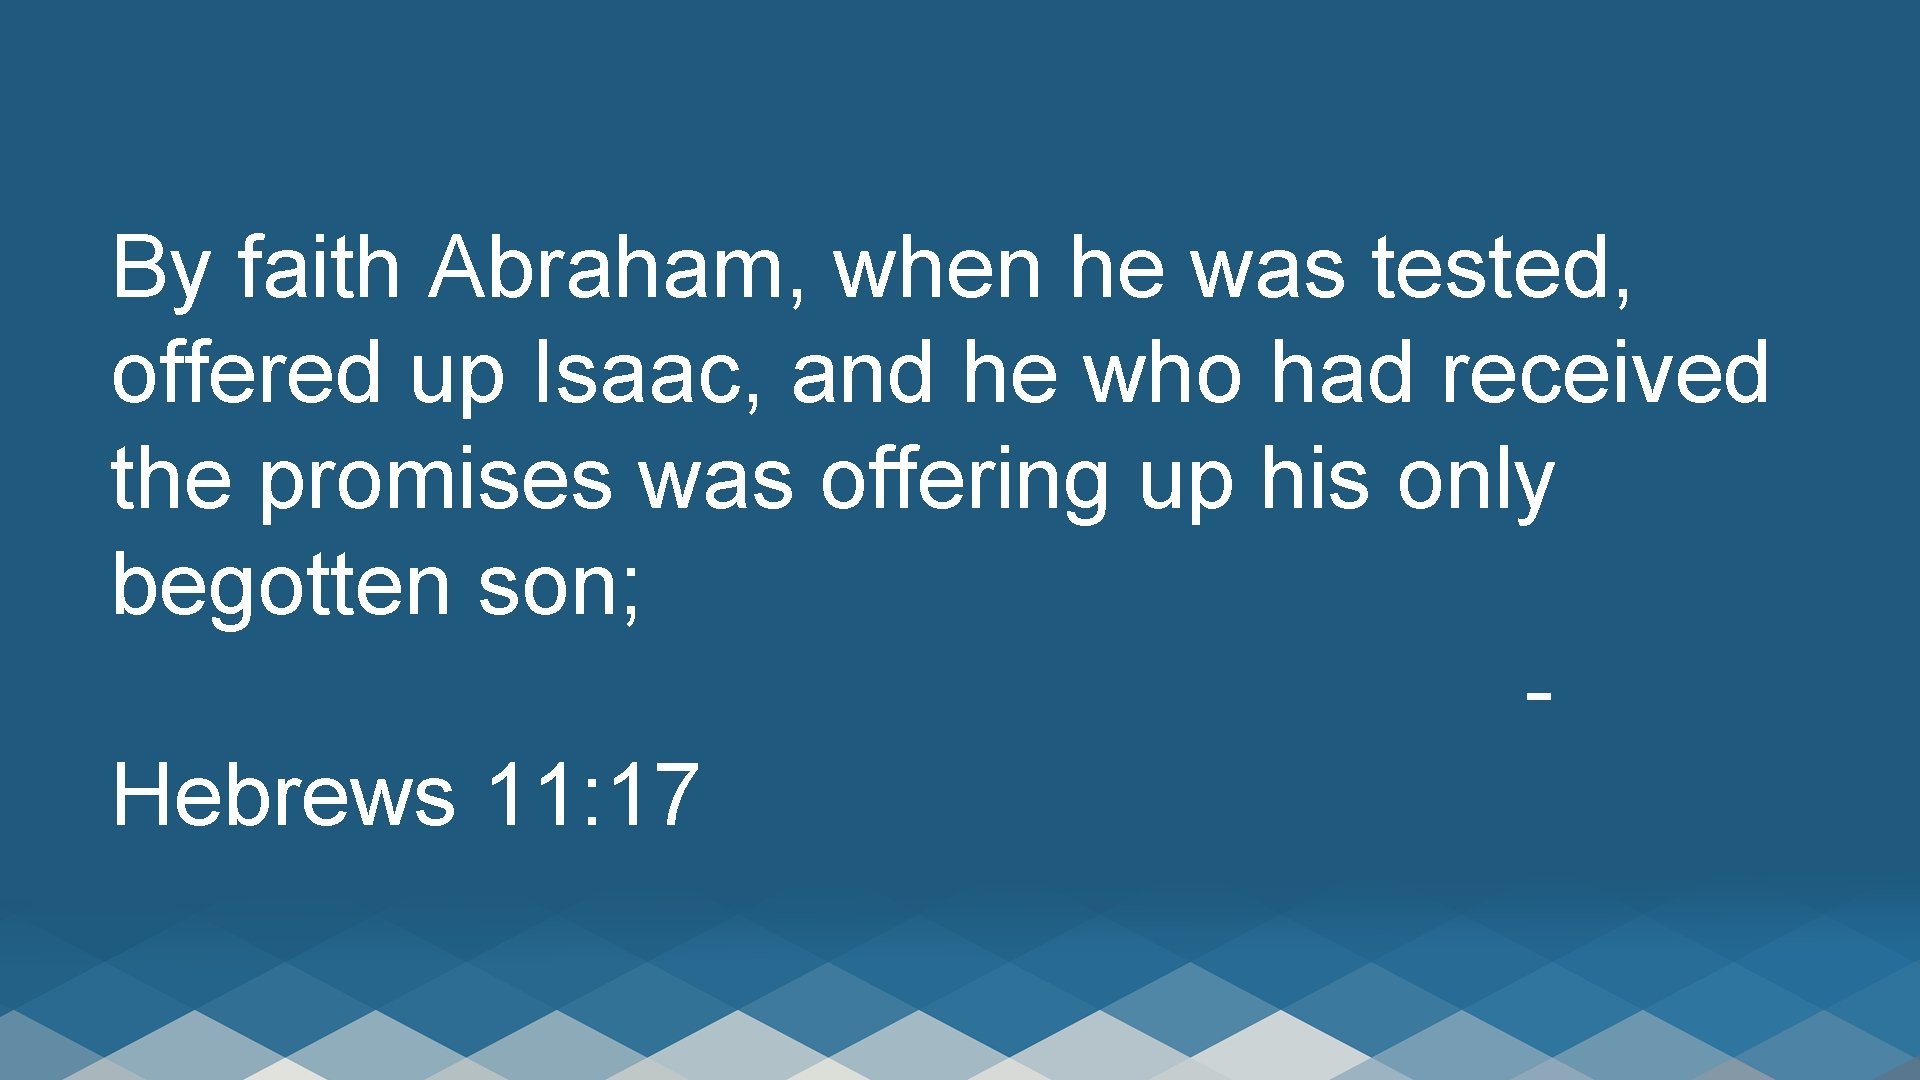 By faith Abraham, when he was tested, offered up Isaac, and he who had